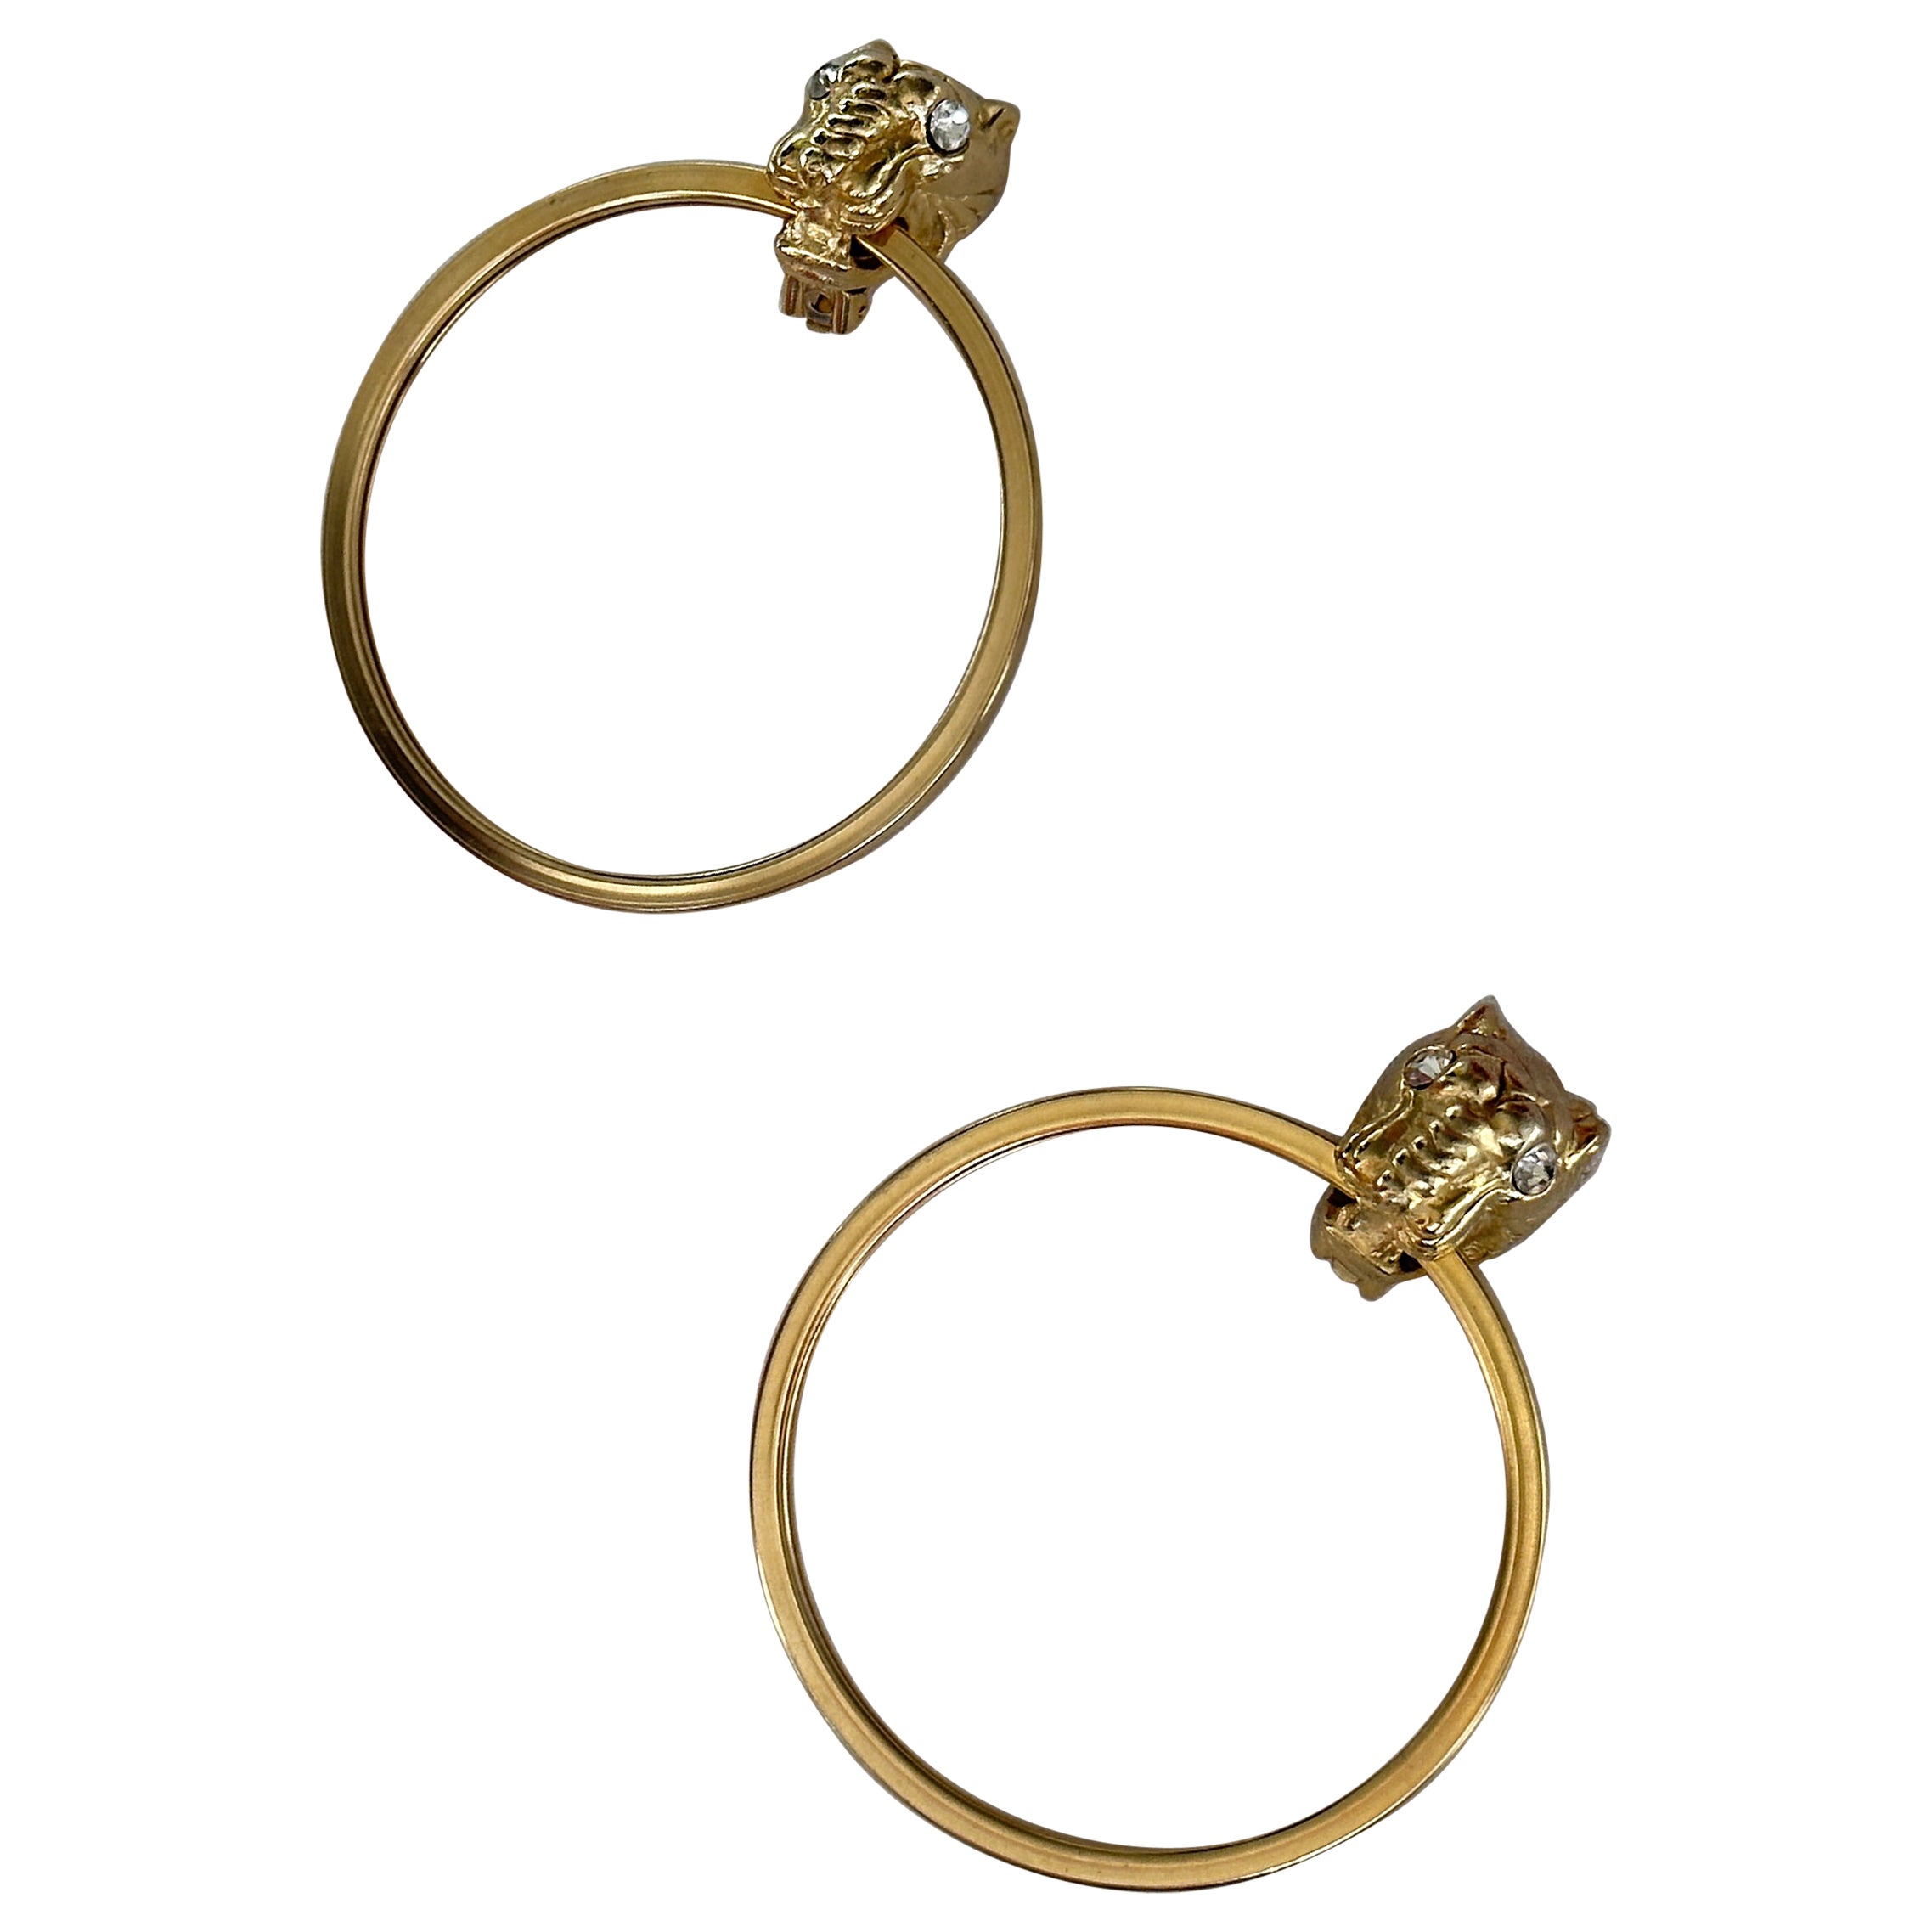 Vintage Large Gold Panther Hoop Earrings, attributed to Givenchy